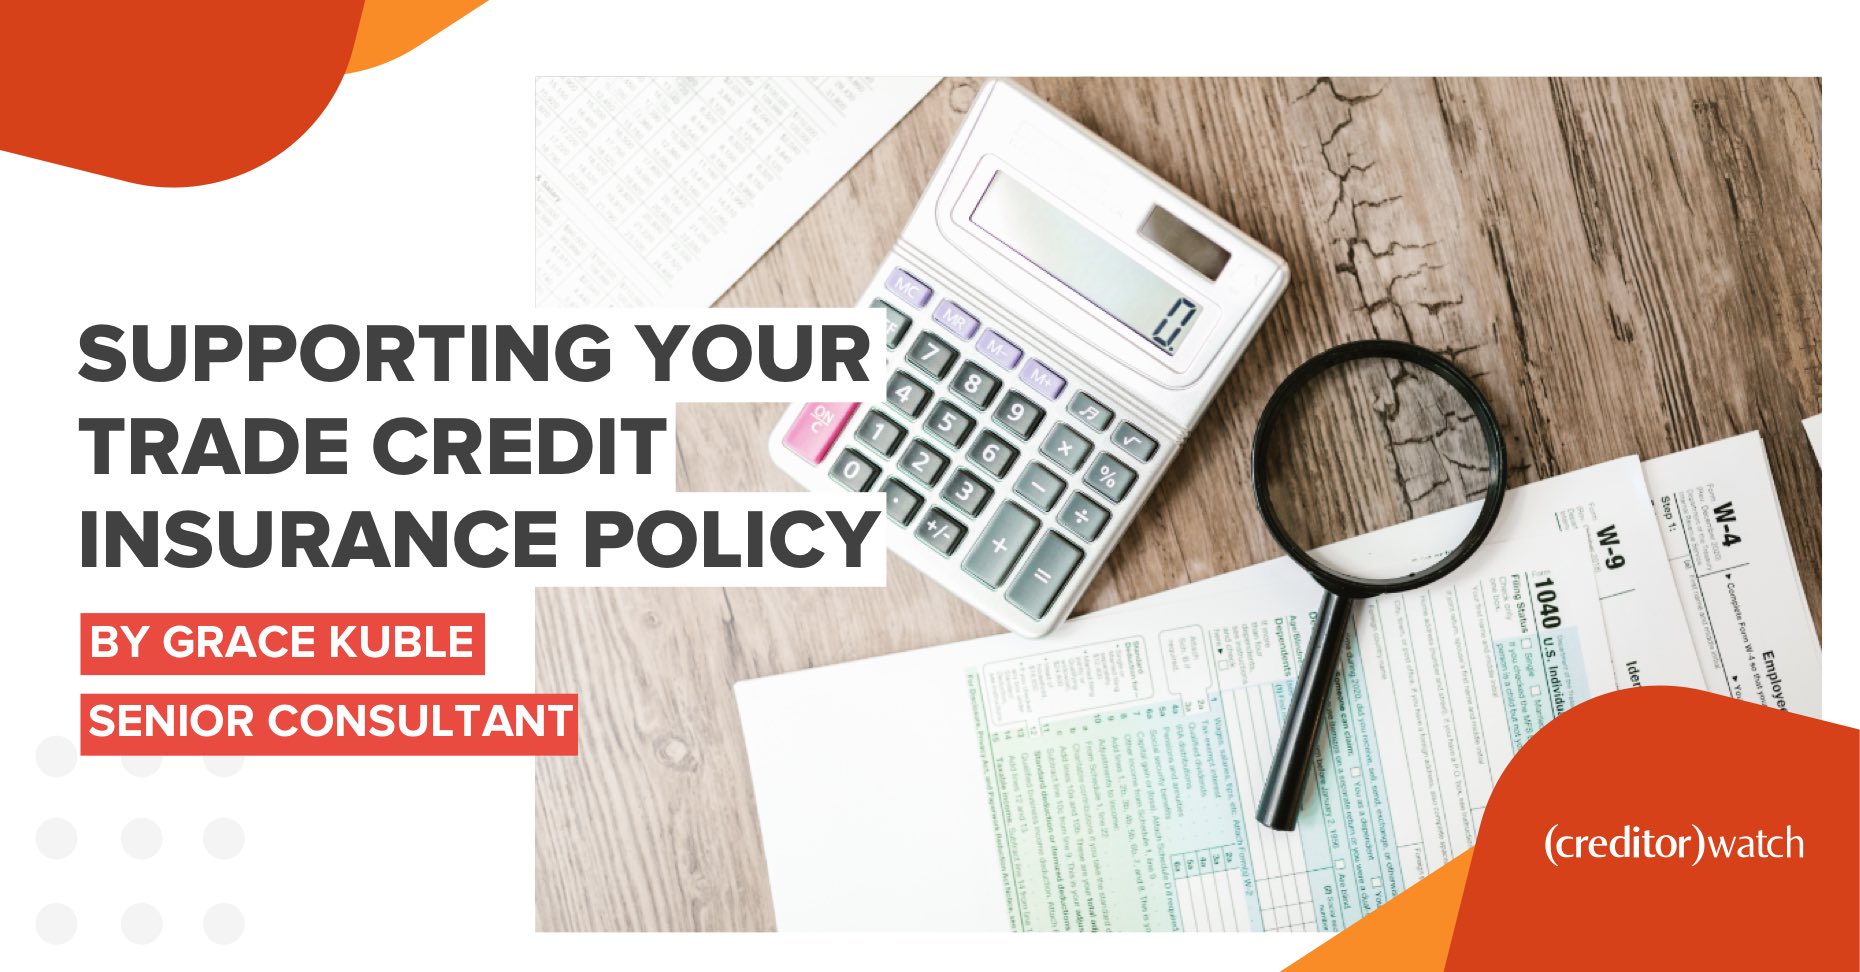 Supporting your trade credit insurance policy